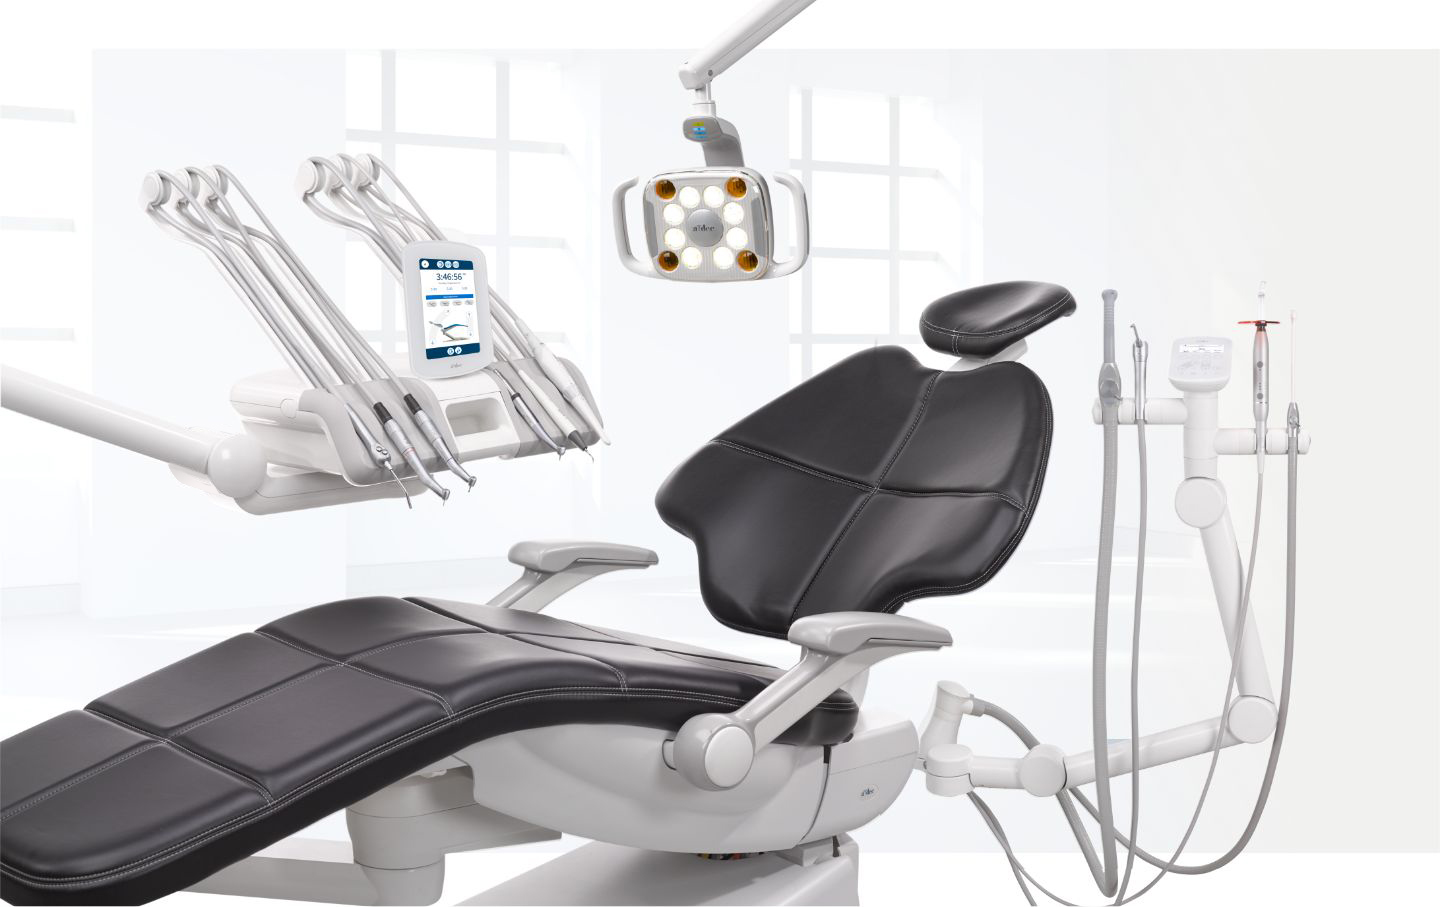 A-dec 500 dental chair package with delivery system and dental light